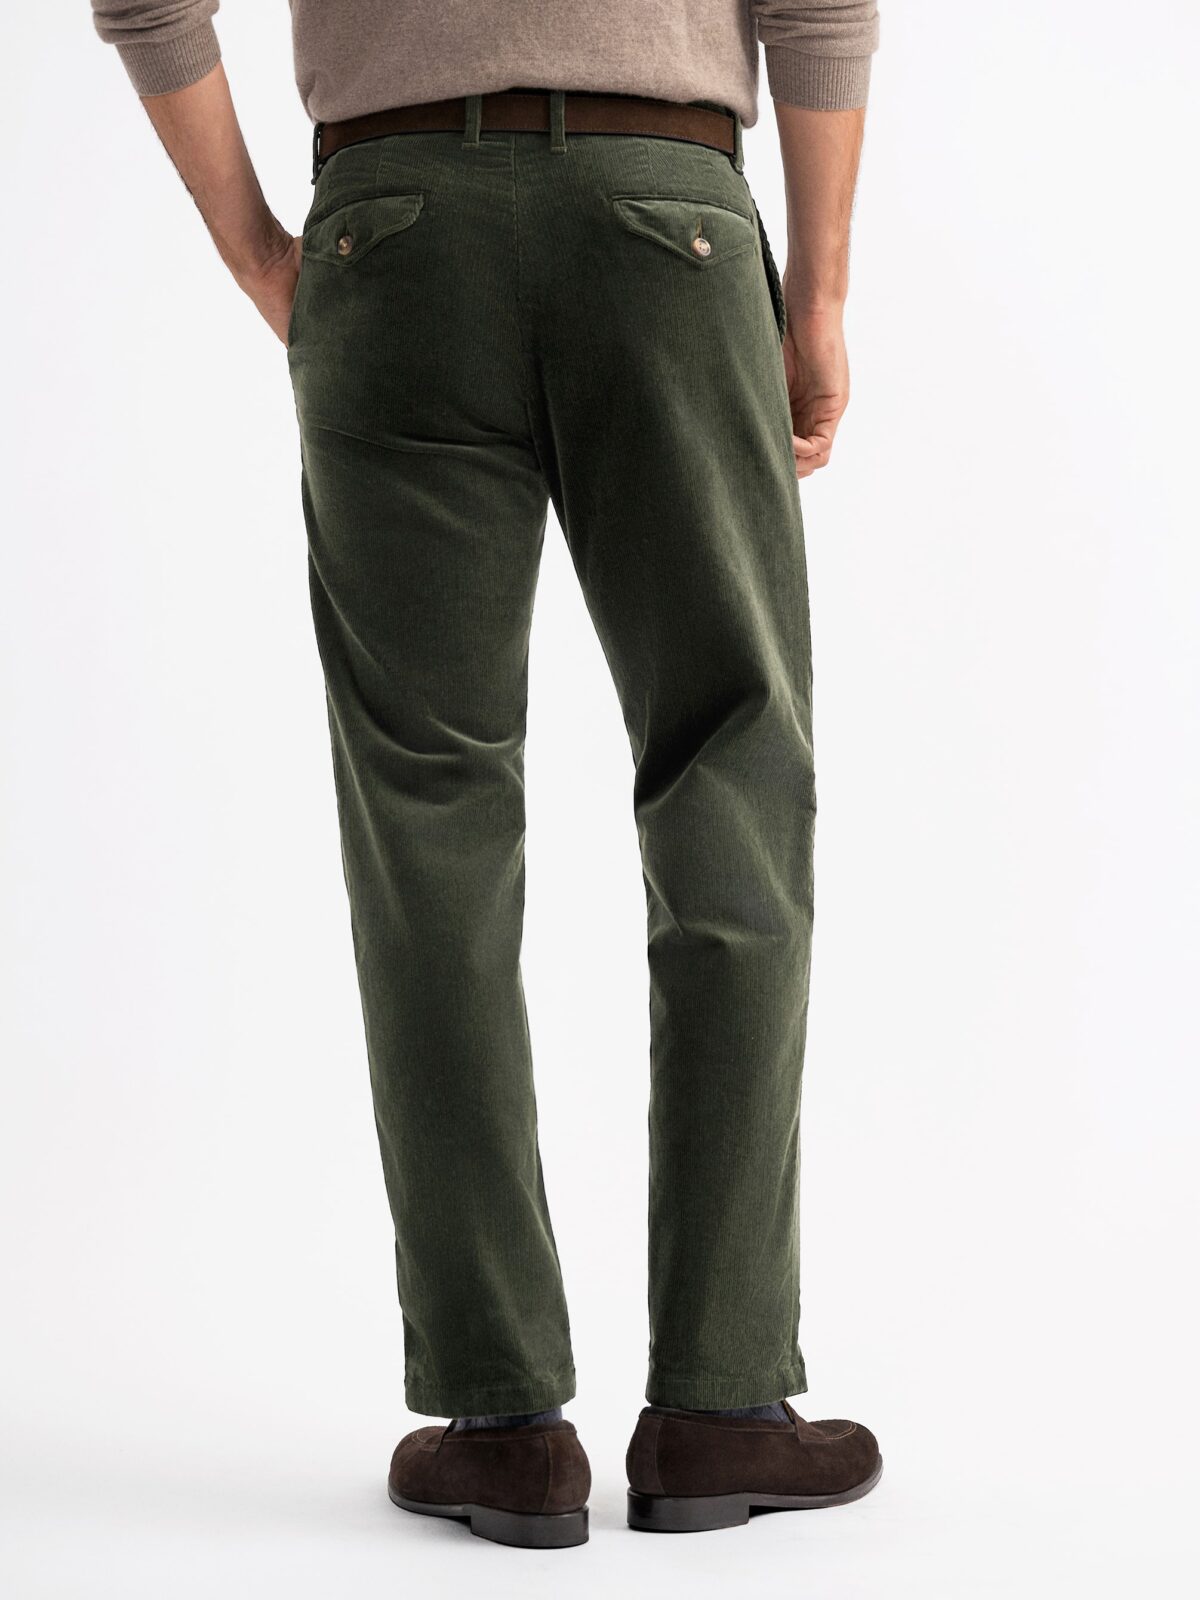 Green Corduroy Pants for Men - Green Tapered Pants